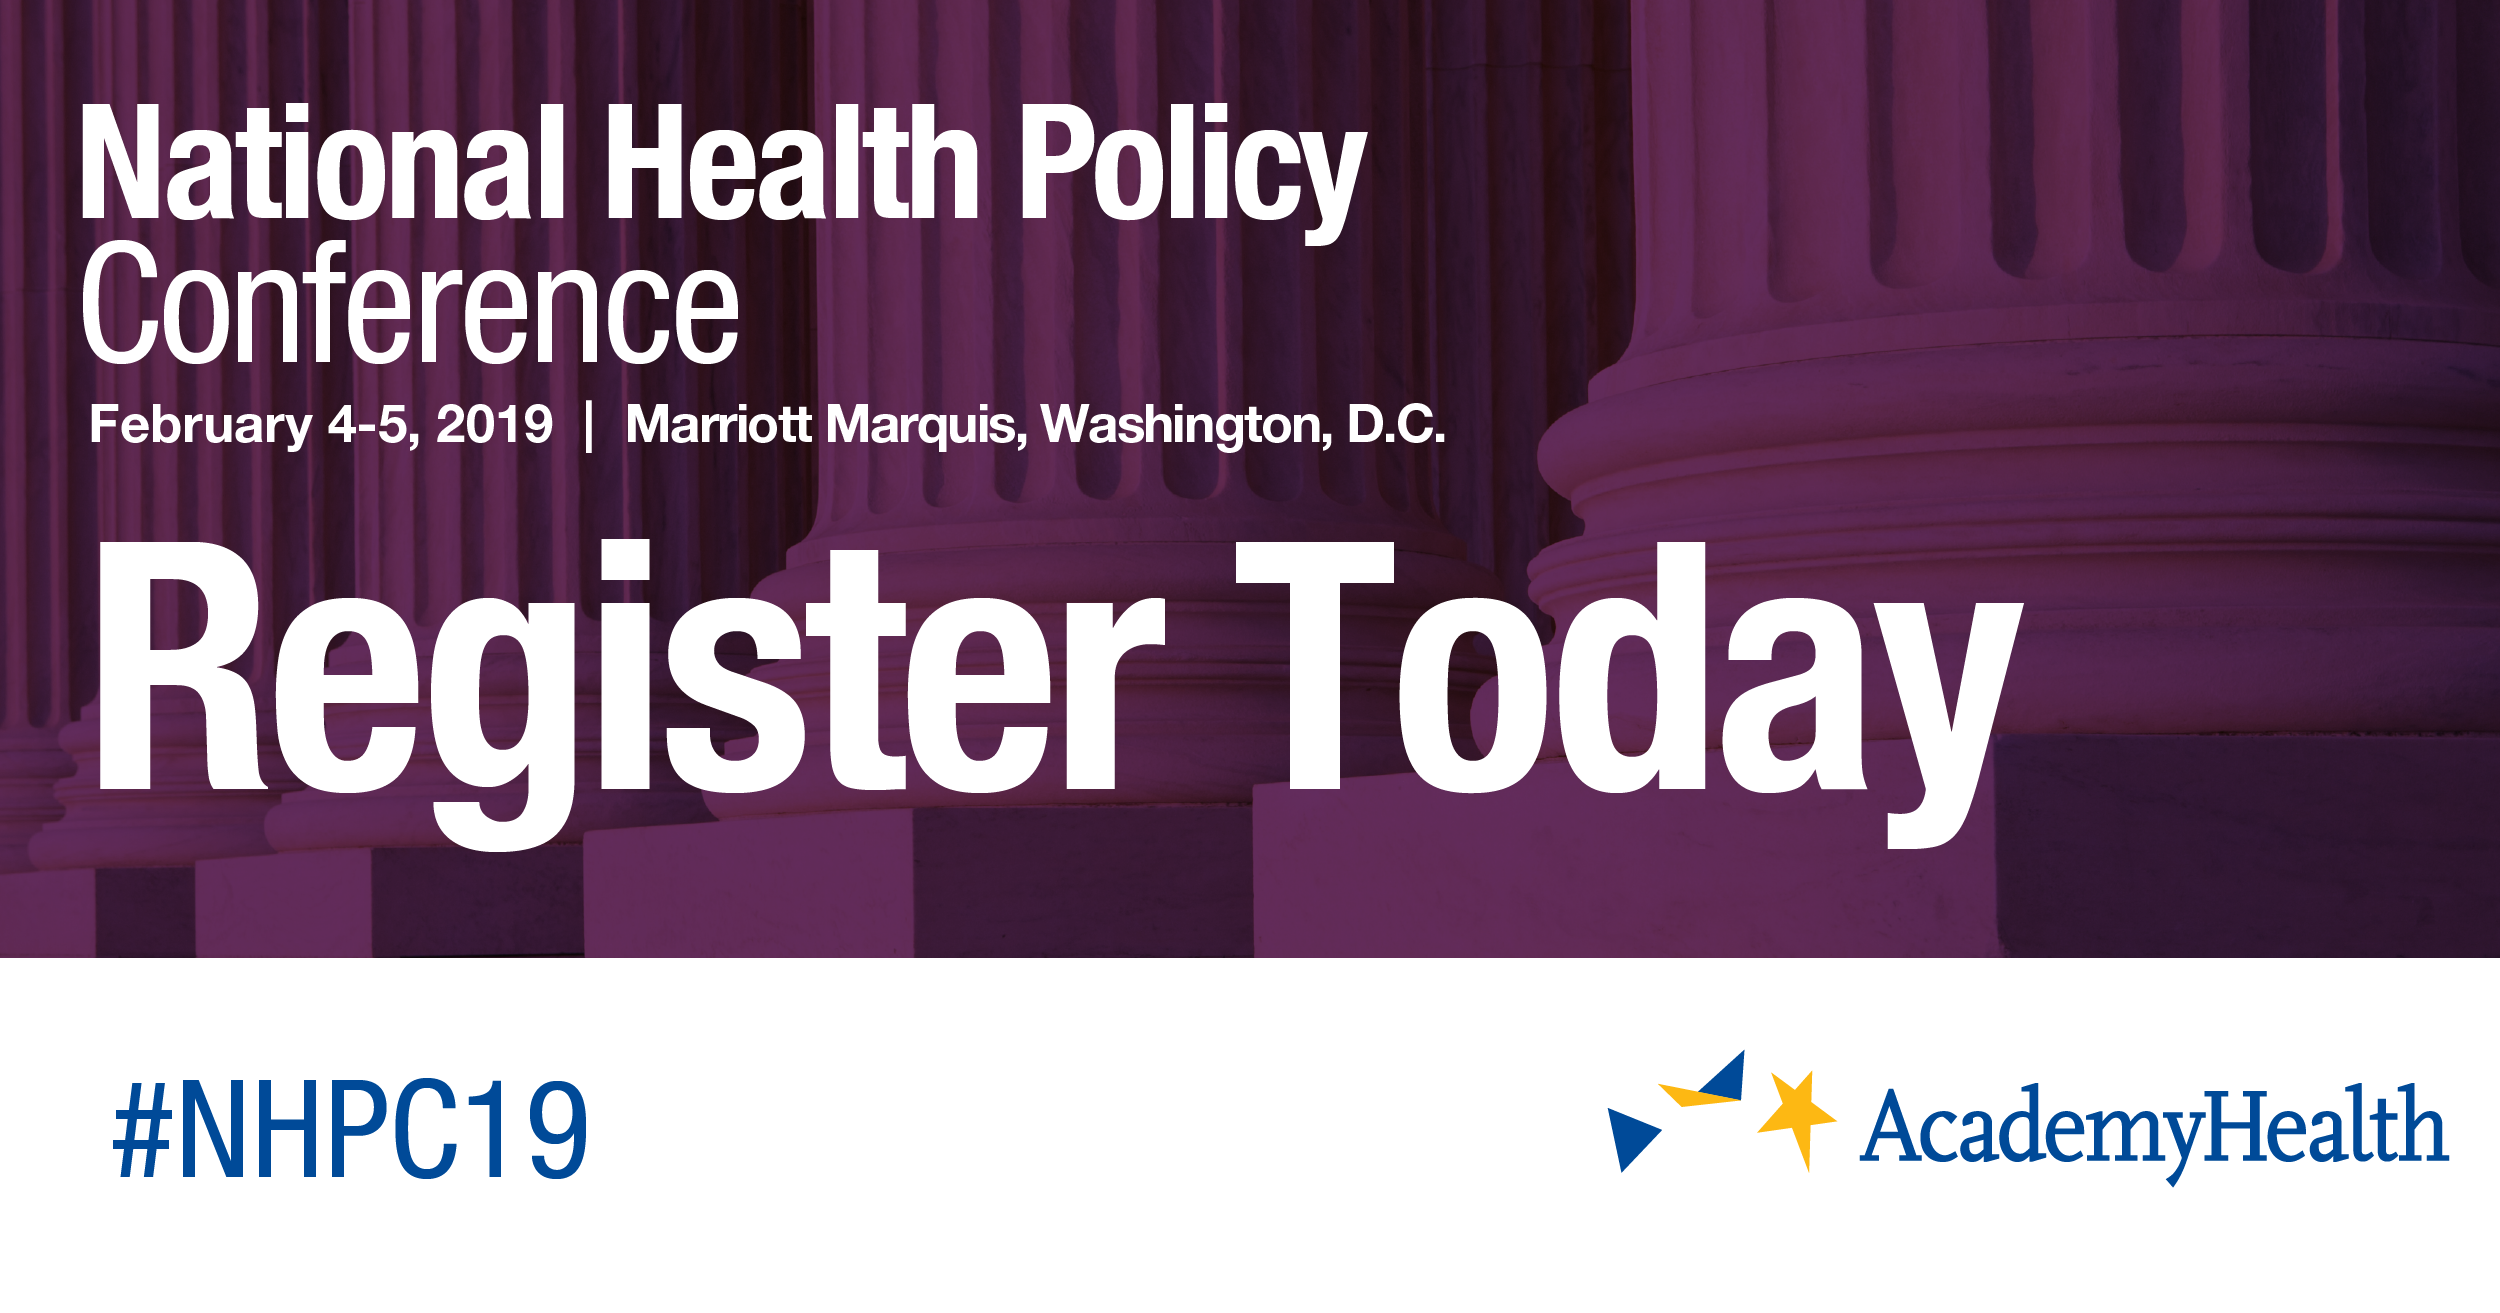 National Health Policy Conference Marketing Toolkit AcademyHealth